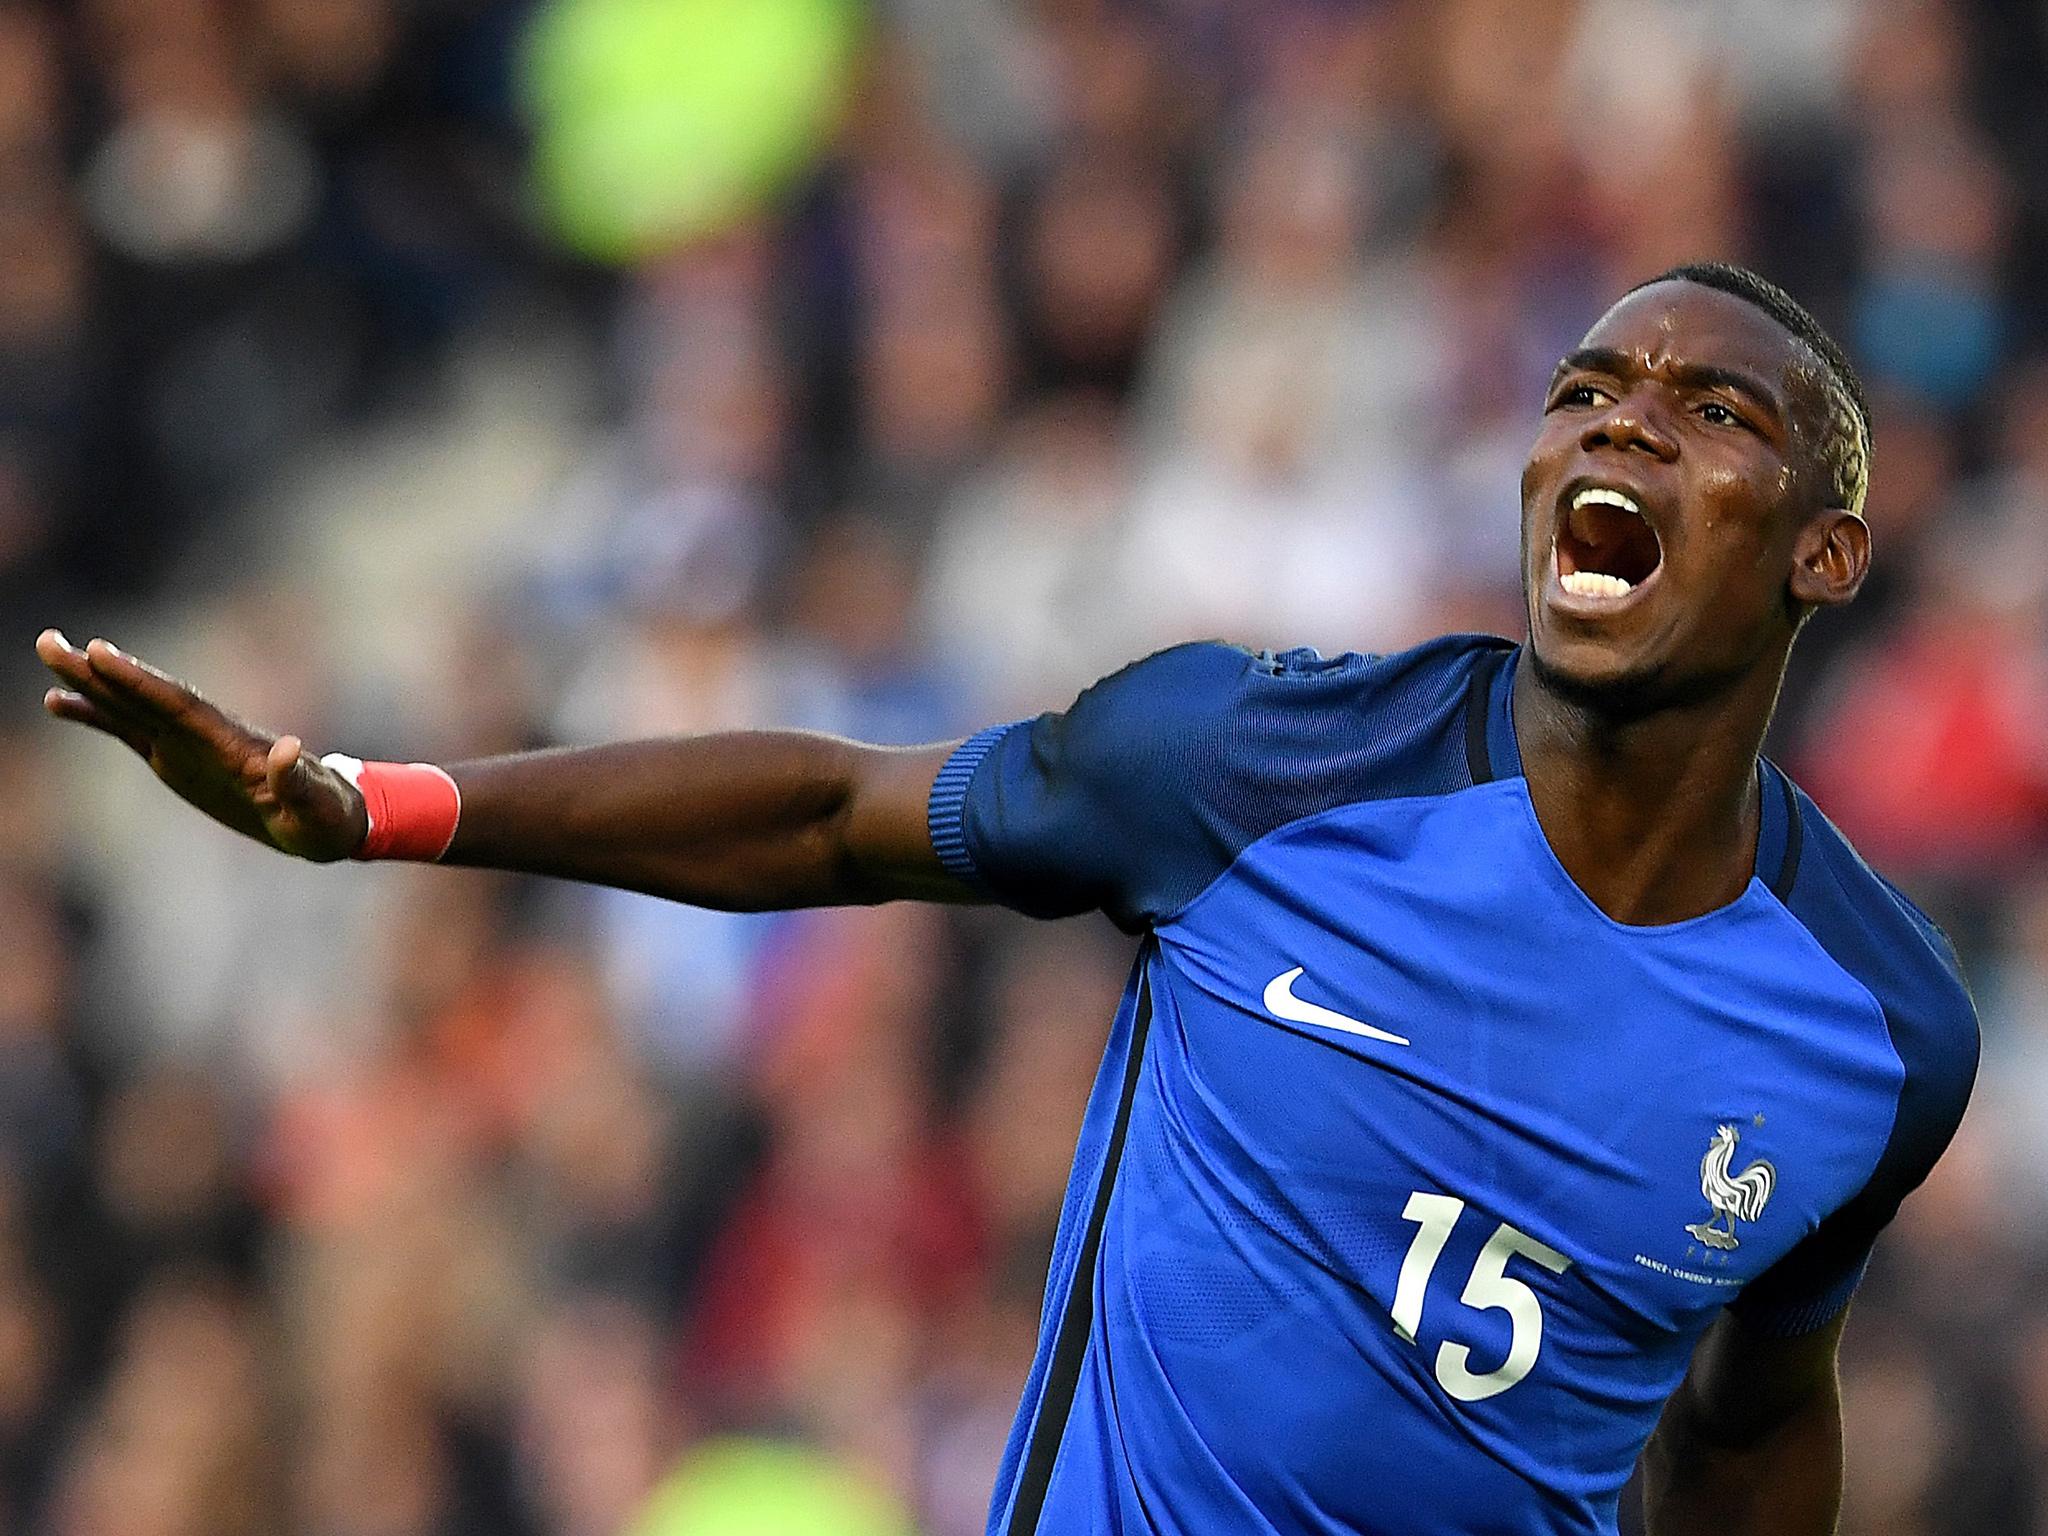 Pogba is one of several young players who could impress